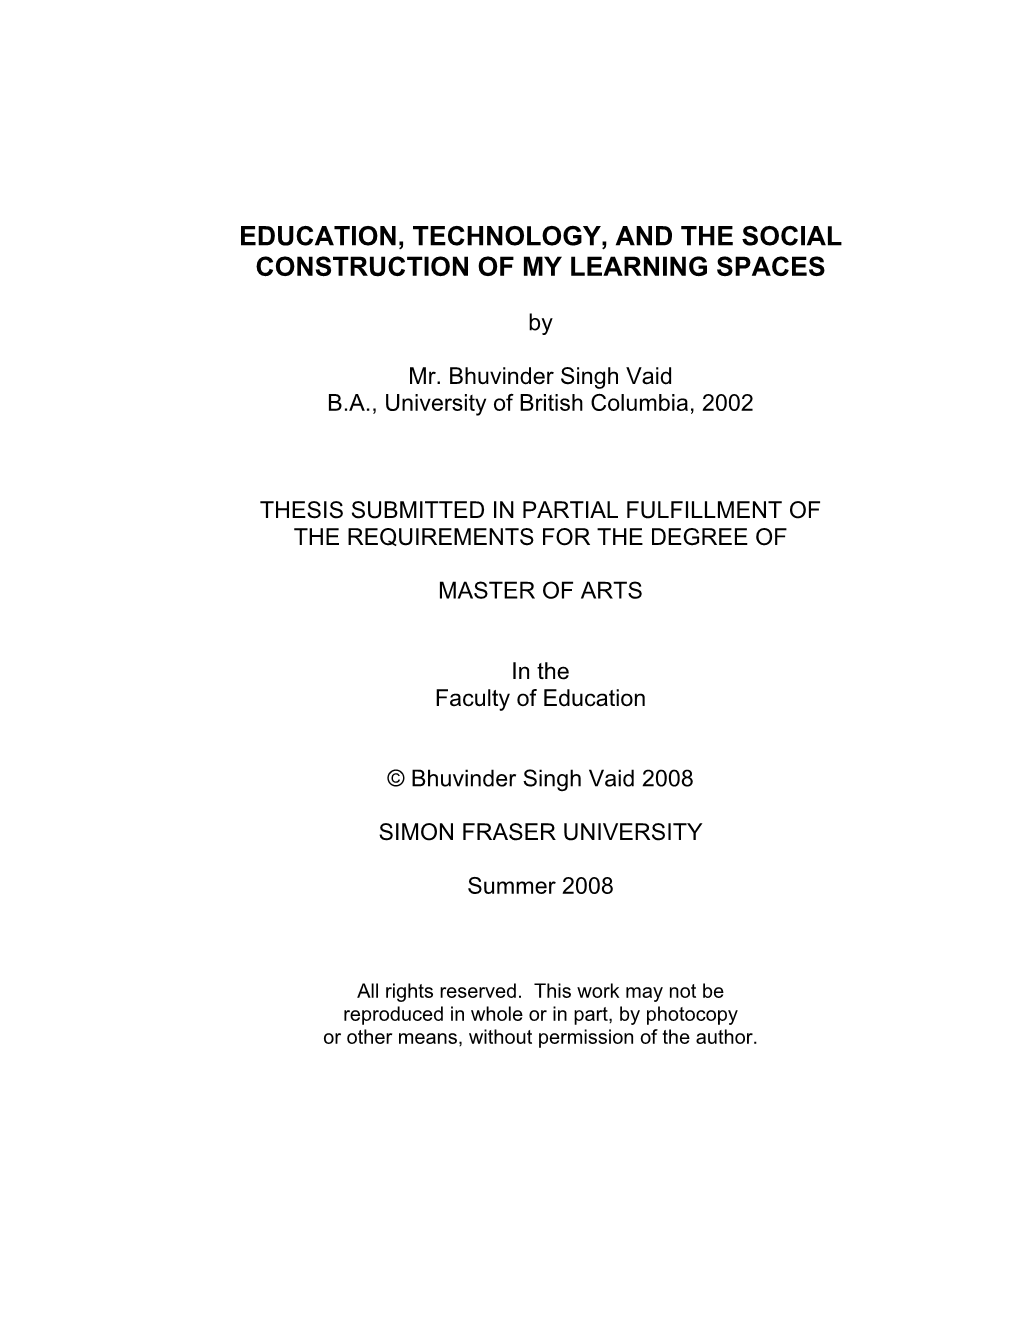 Education, Technology, and the Social Construction of My Learning Spaces